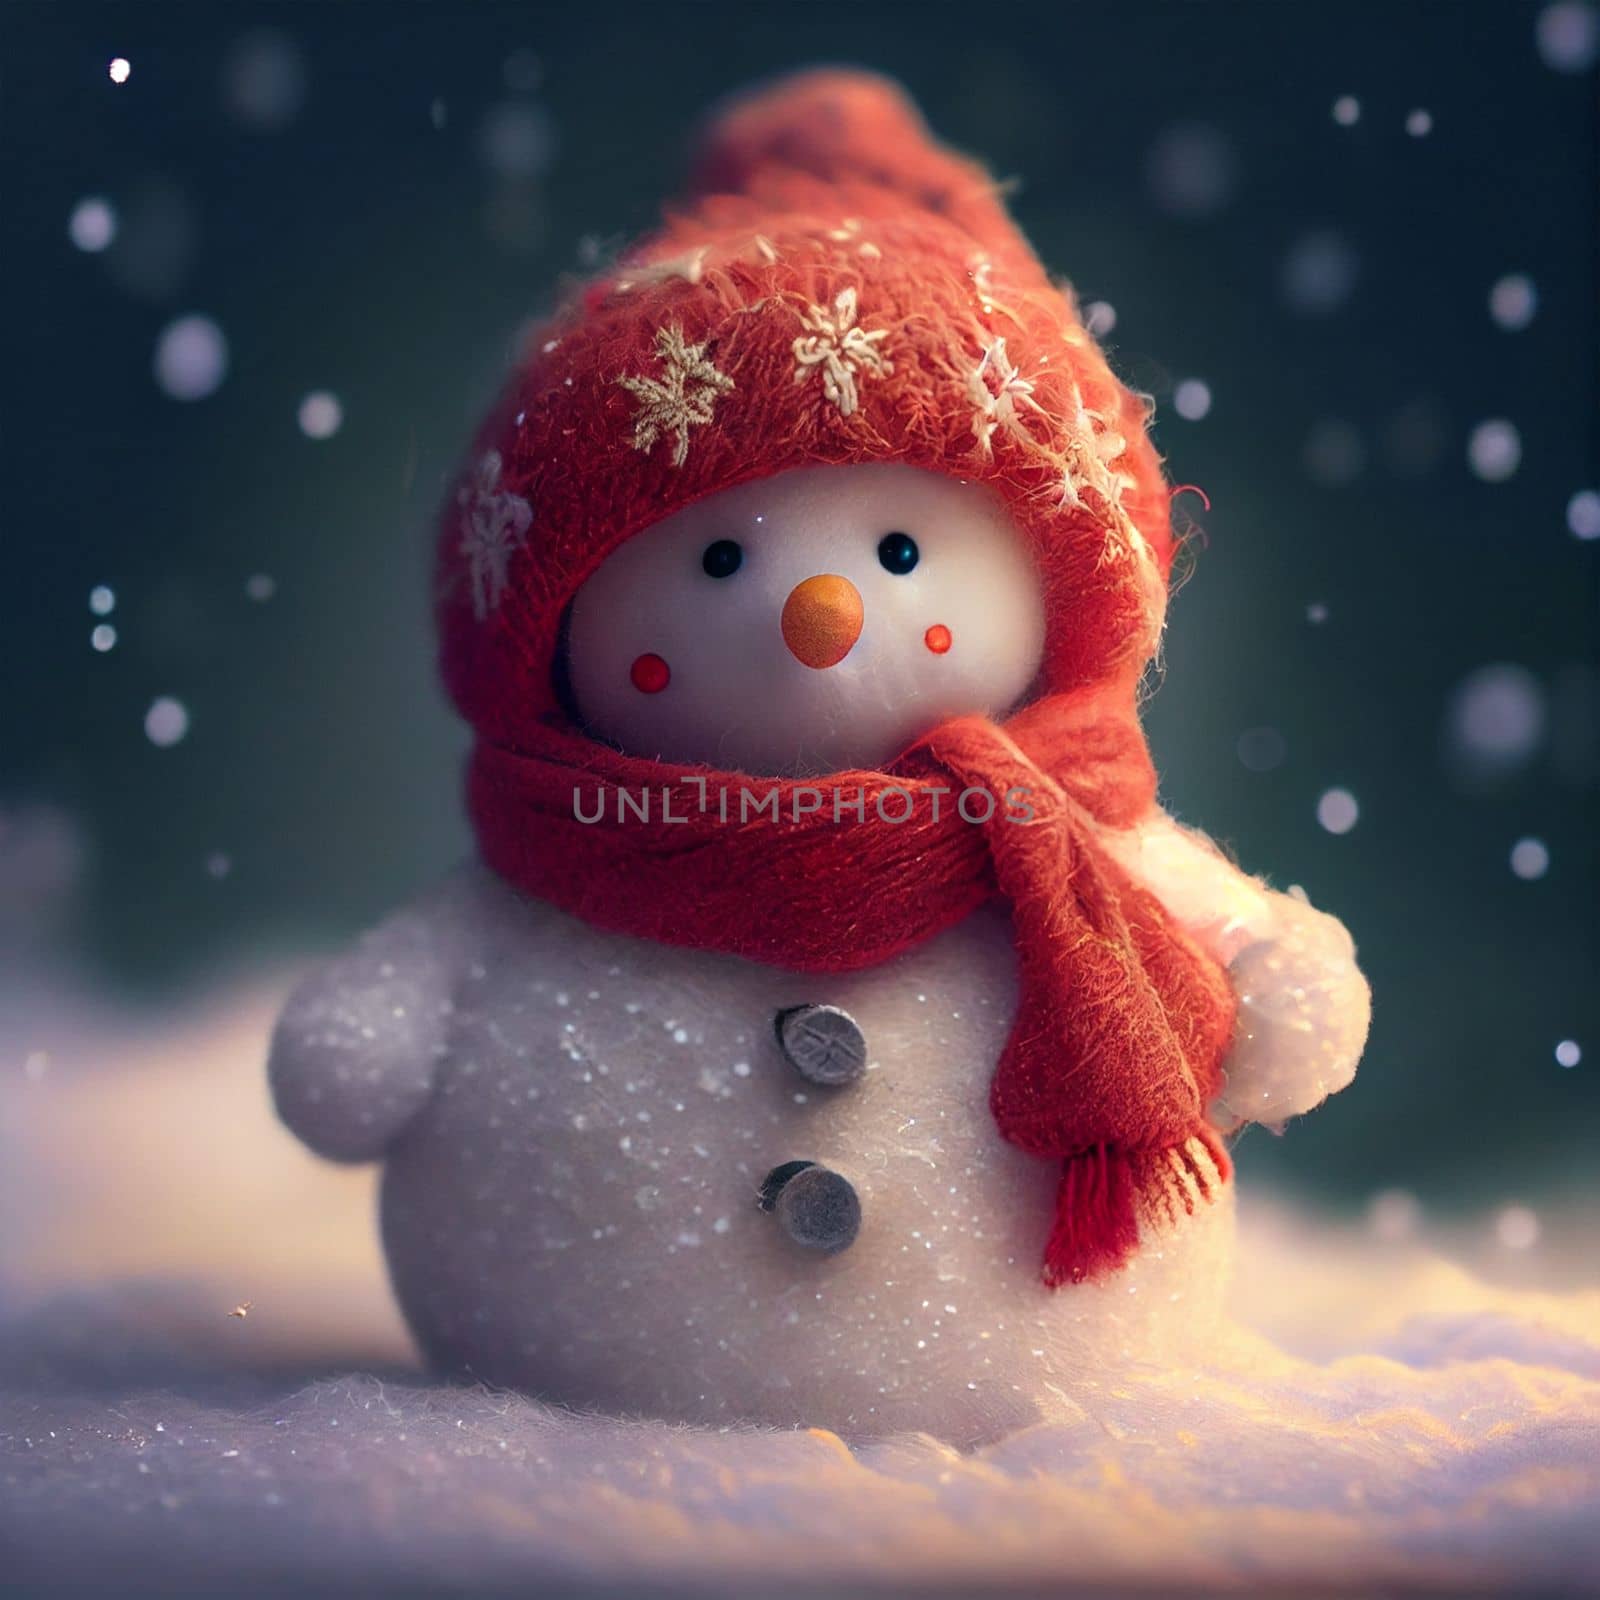 Cute snowman in a red hat and scarf on the snow by studiodav